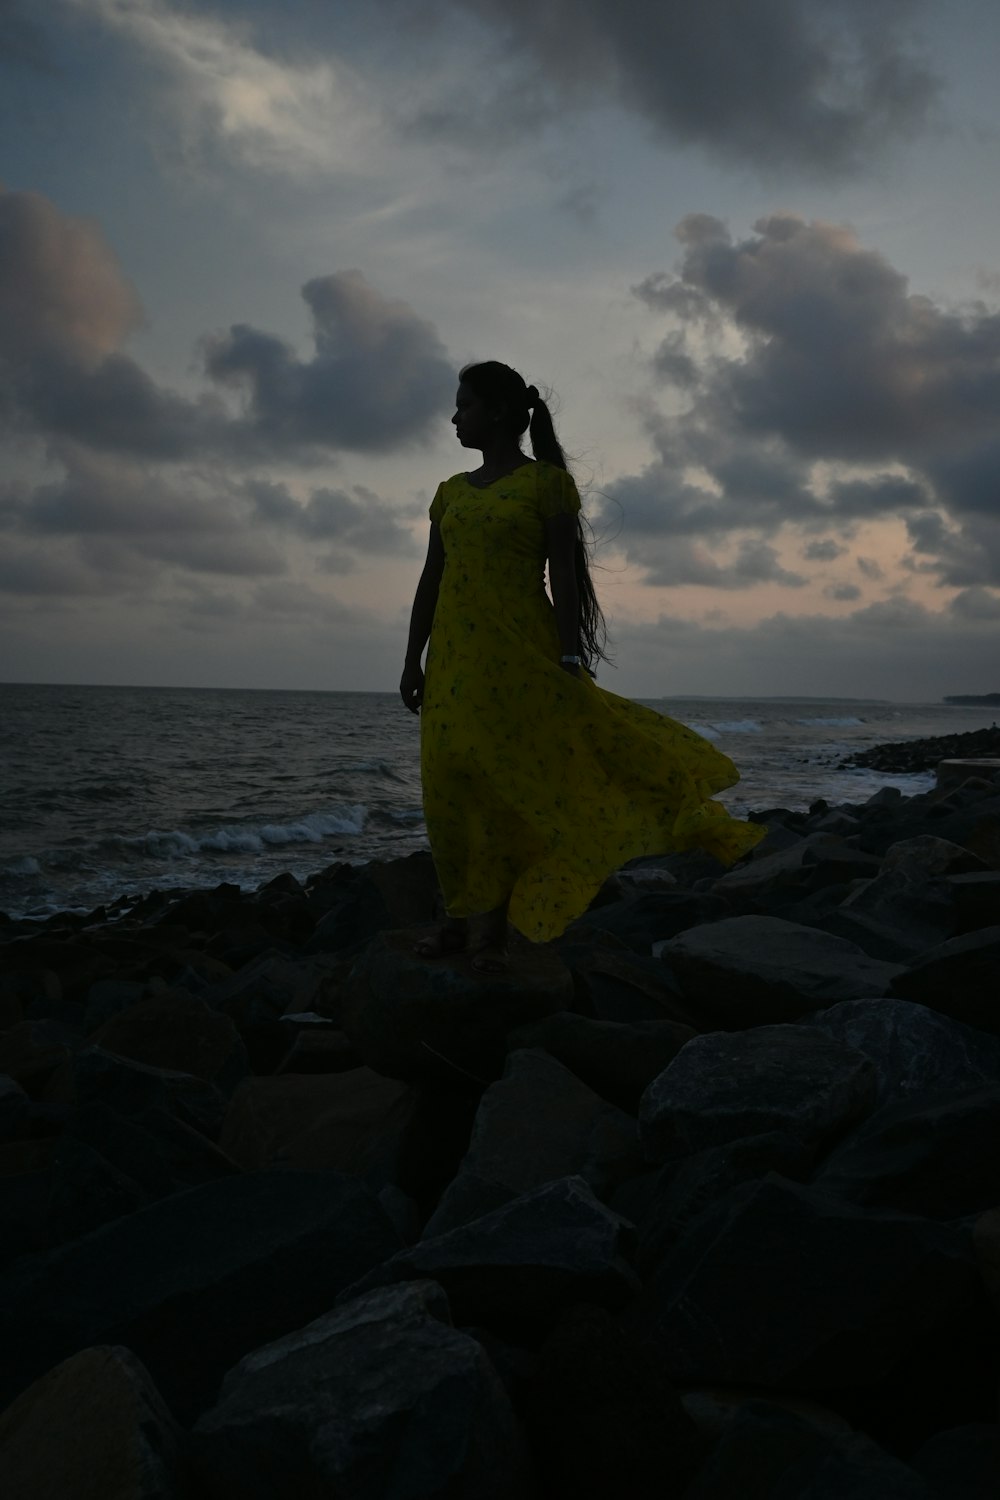 a person in a yellow dress on a rocky beach